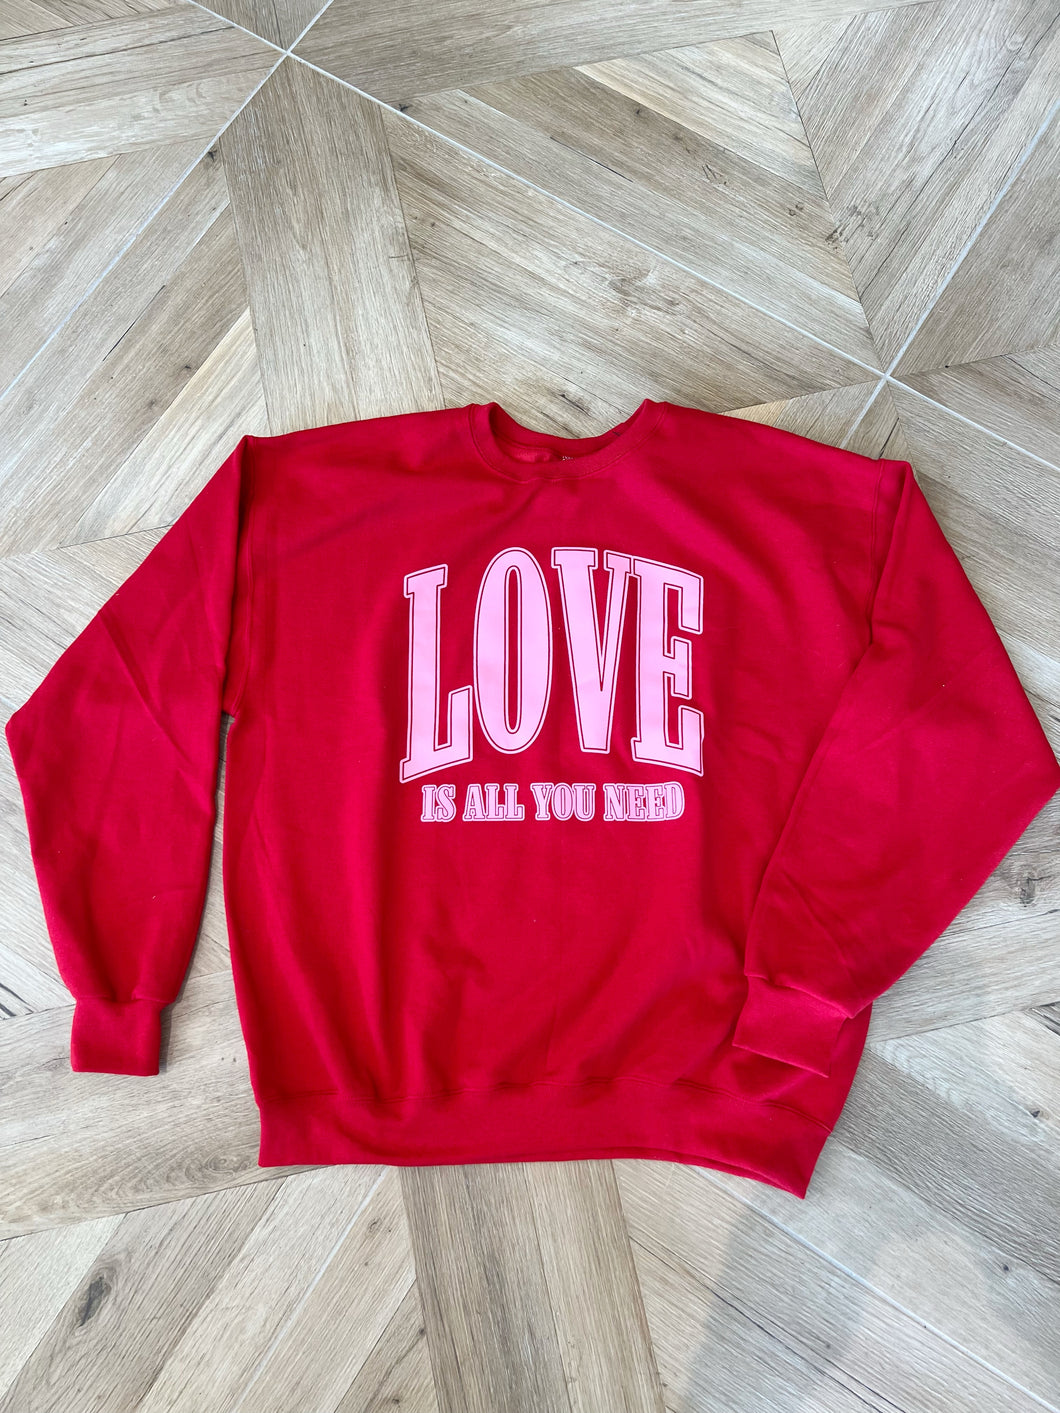 Oversized 90's Fit, LOVE is All You Need Sweatshirt